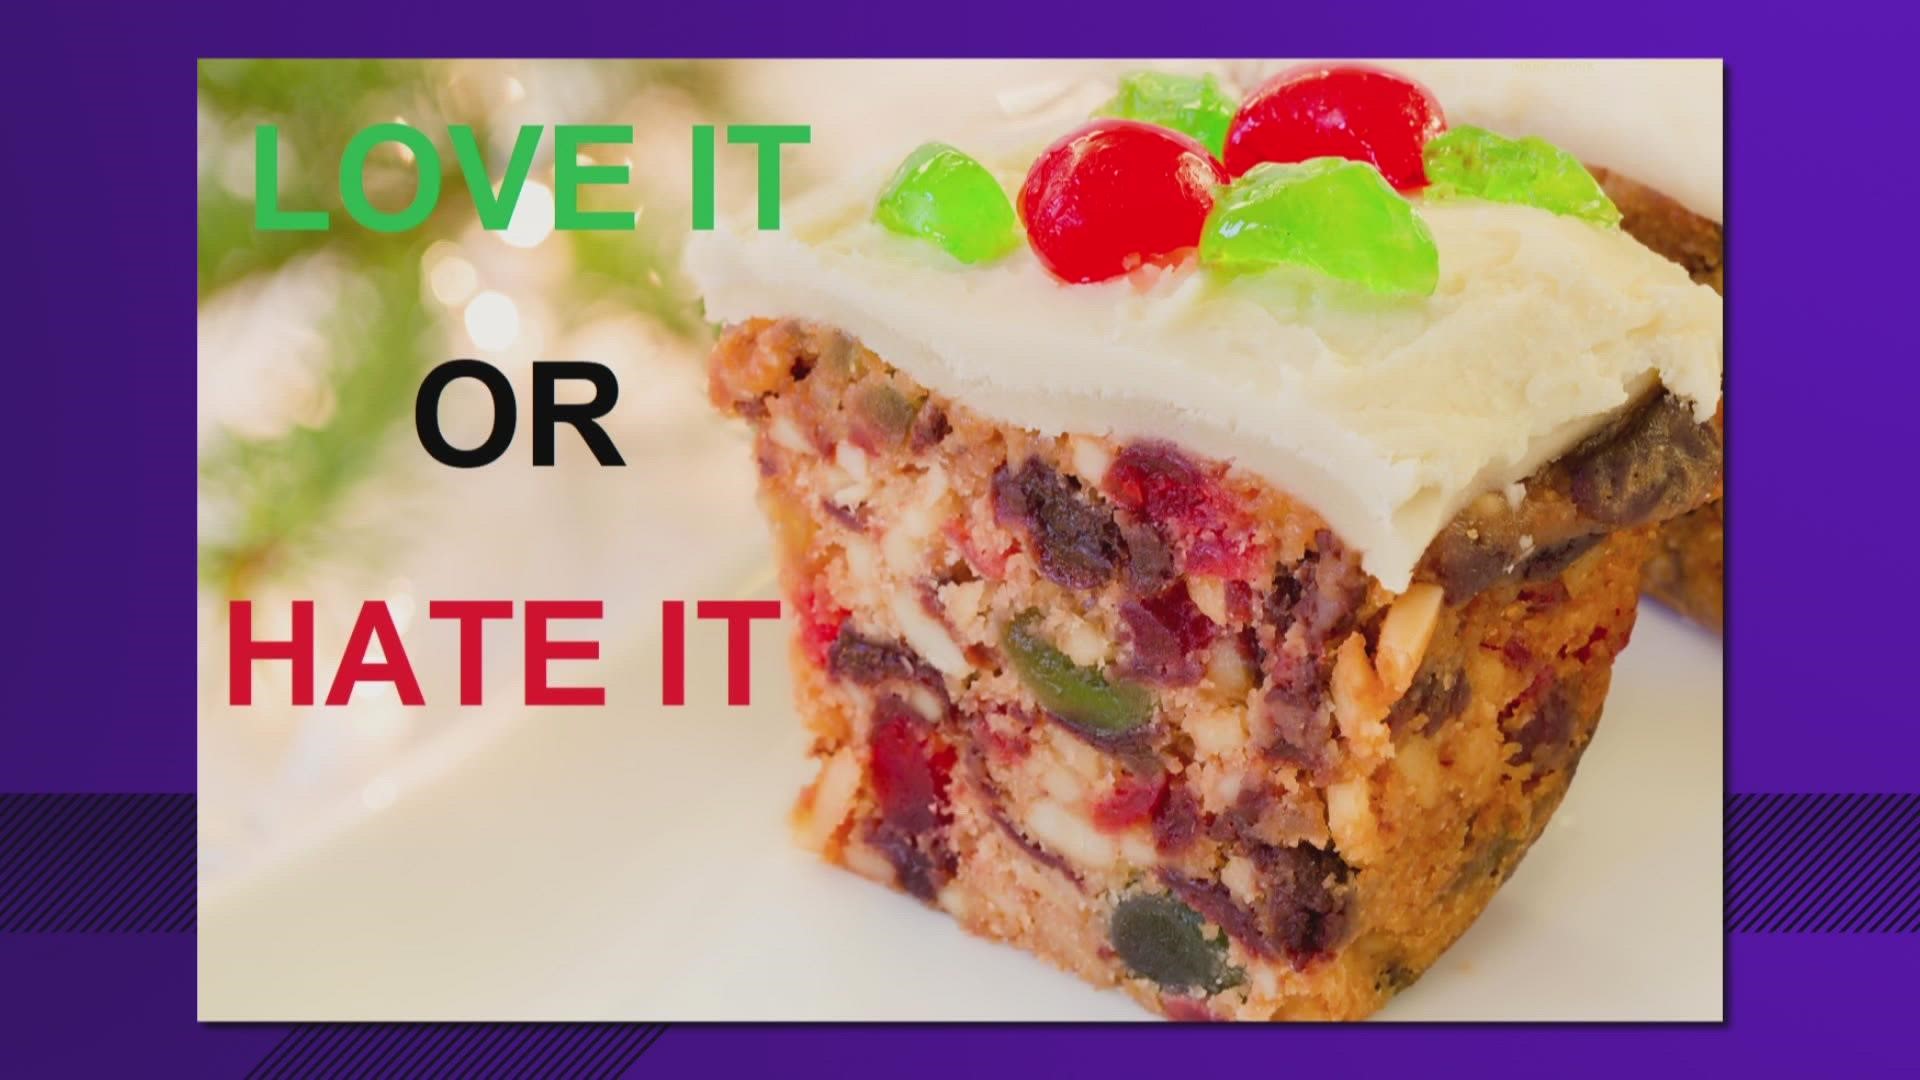 The tradition of having fruit cake during the holidays isn’t going away. So do you love it or hate it?